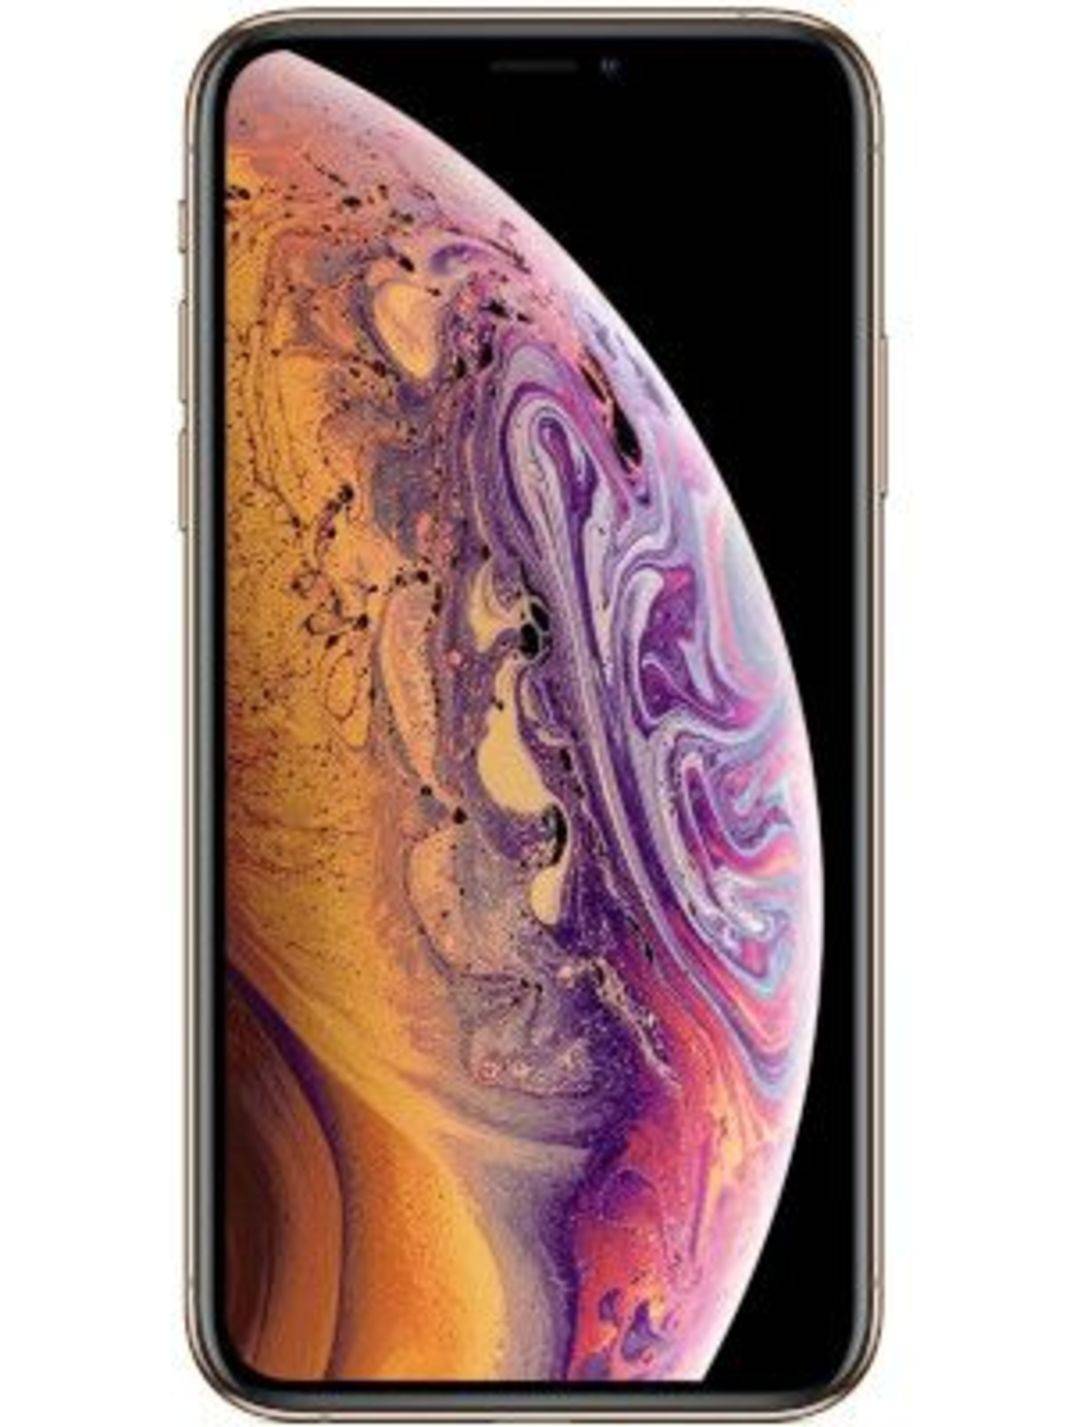 iphone xs for honor image